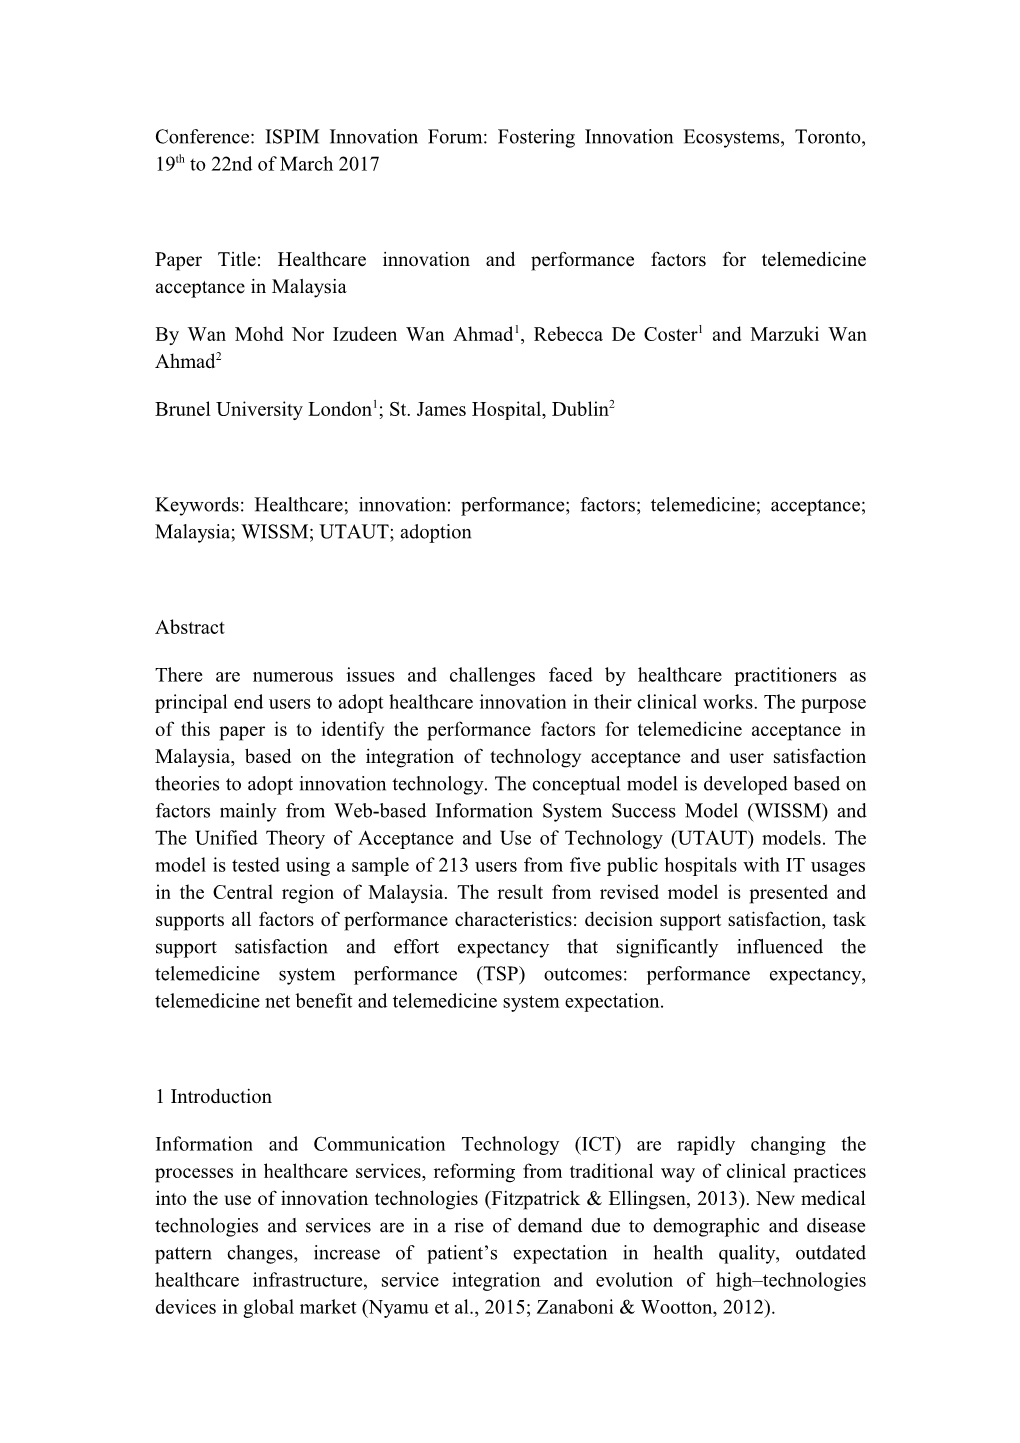 Paper Title: Healthcare Innovation and Performance Factors for Telemedicine Acceptance